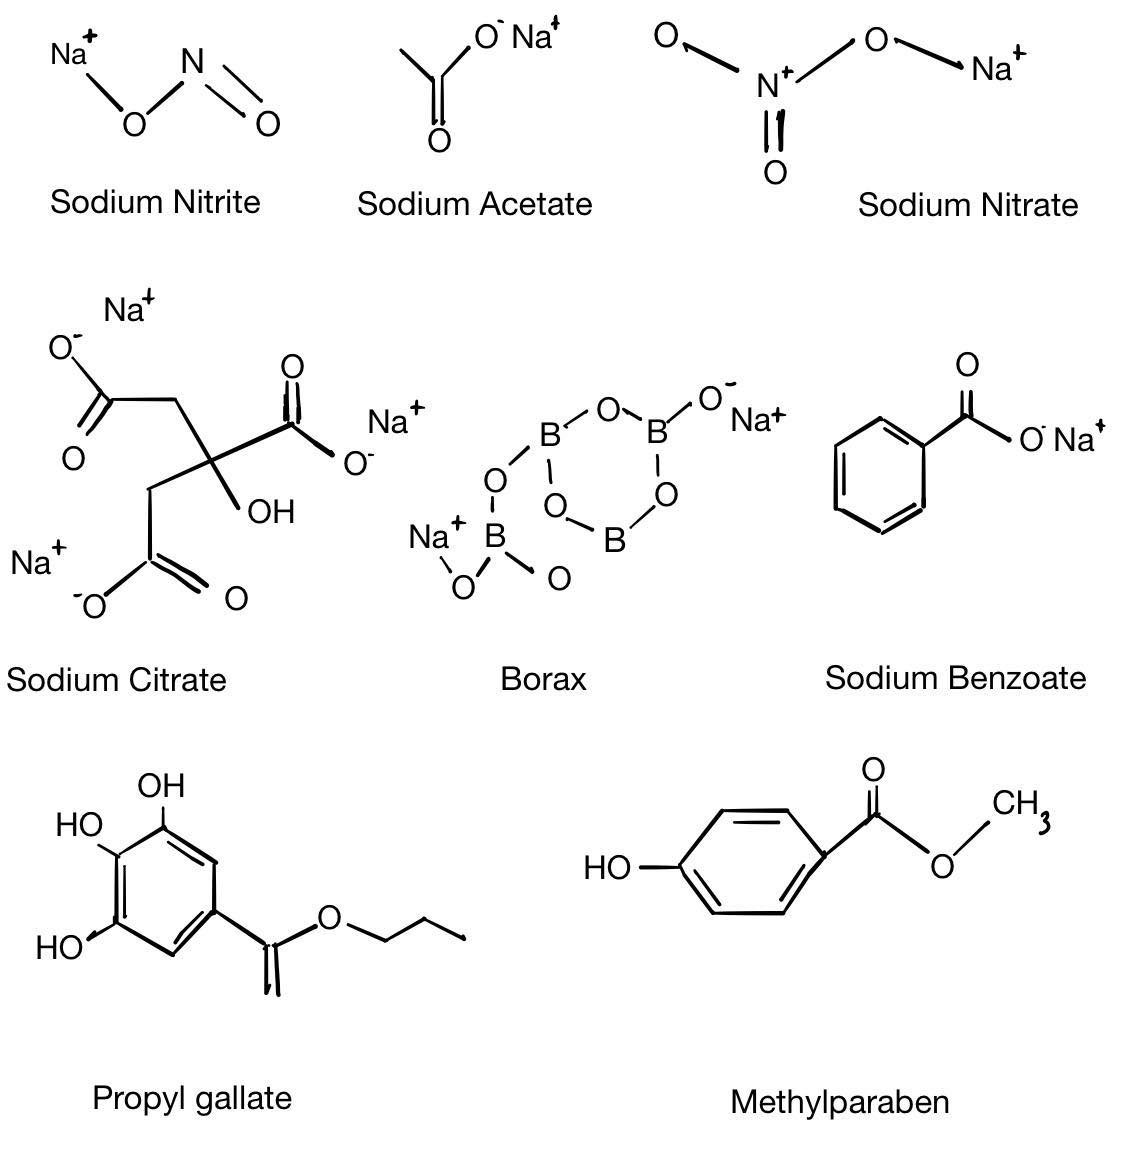 The structure of the synthetic food preservatives found in meat products.png